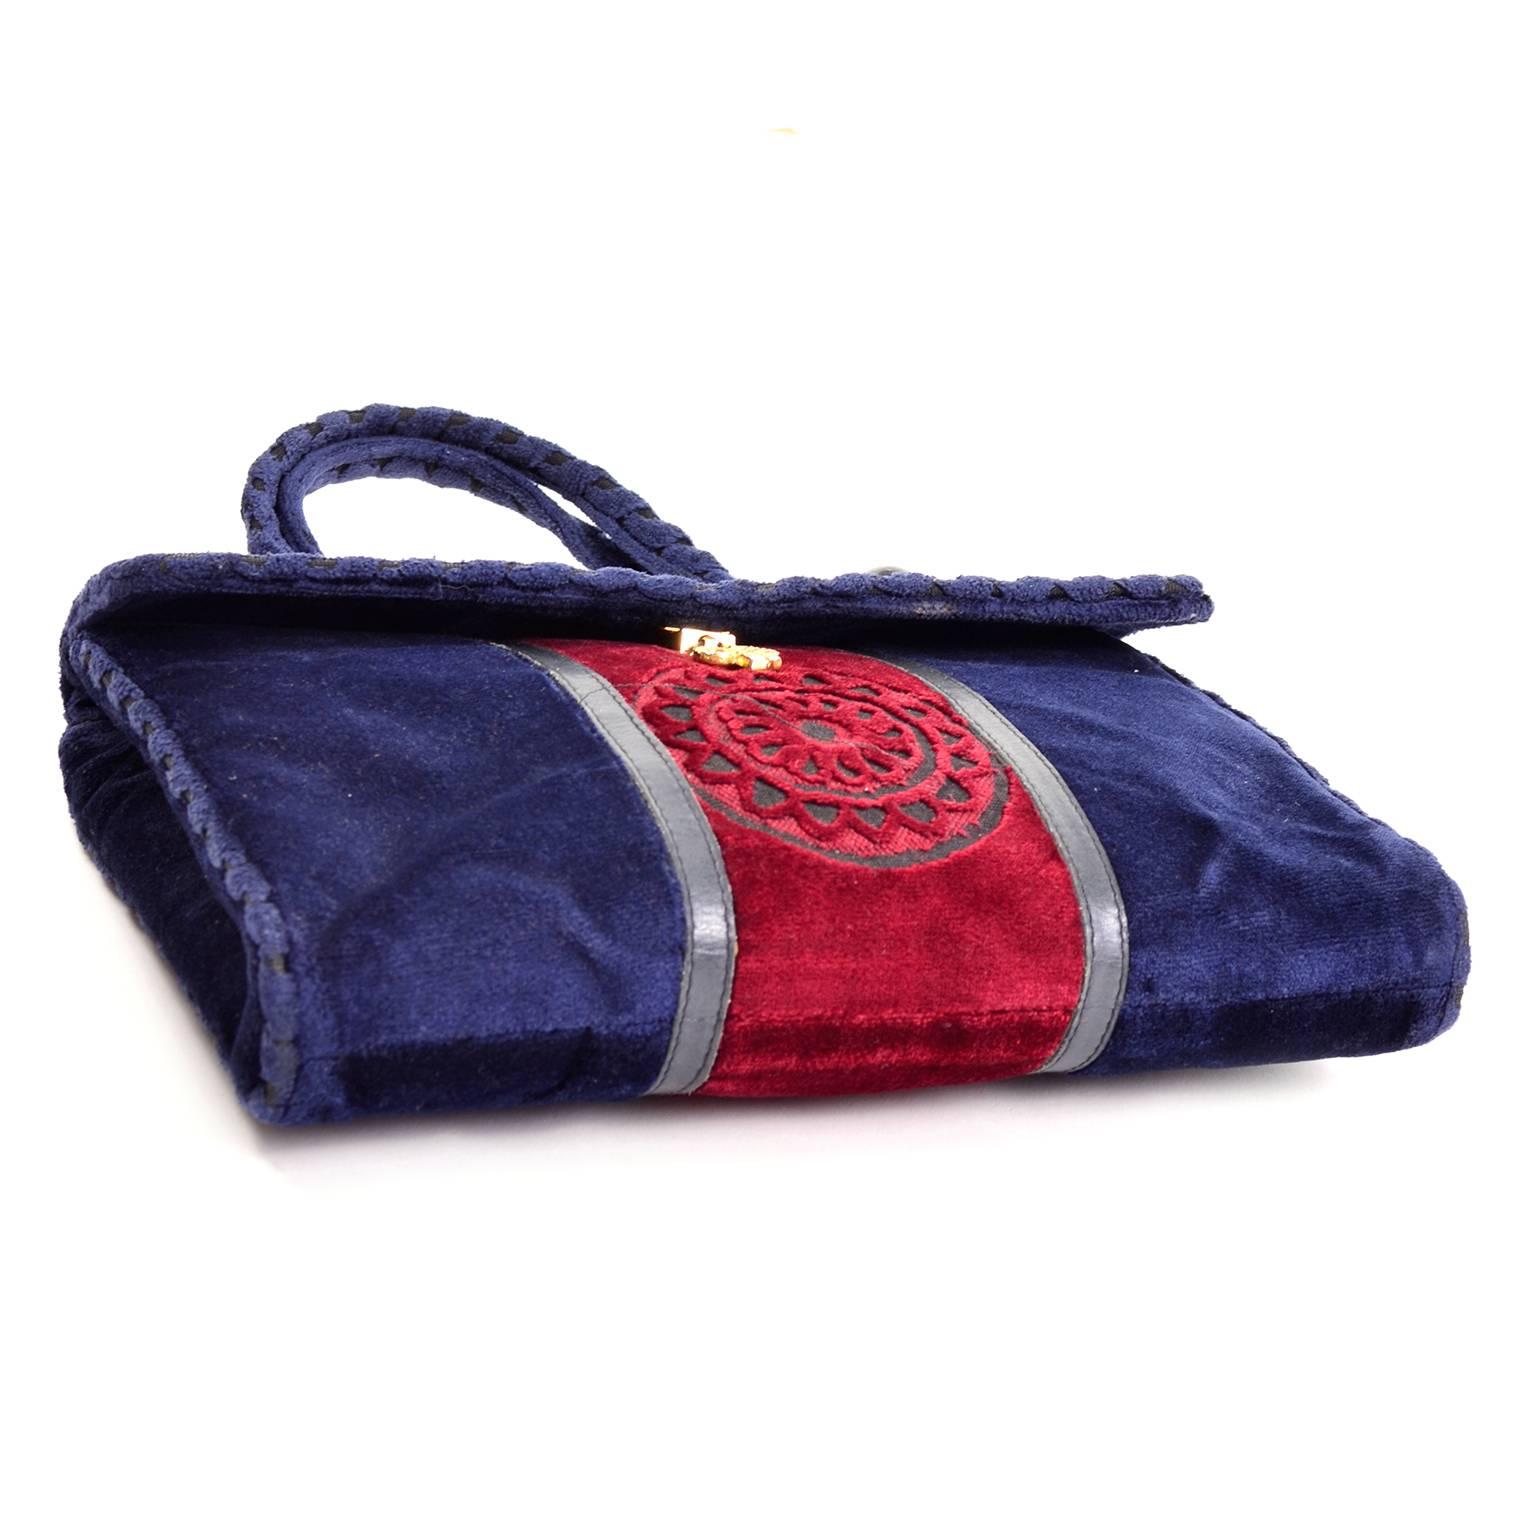 This vintage L Righini Via Condotti handbag in blue and red velveteen is perfect for any Fall or Winter wardrobe!  The bag was made by L Righini Via Condotti 76 Roma. It is reported that Roberta di Camerino was inspired by Condotti's bags and